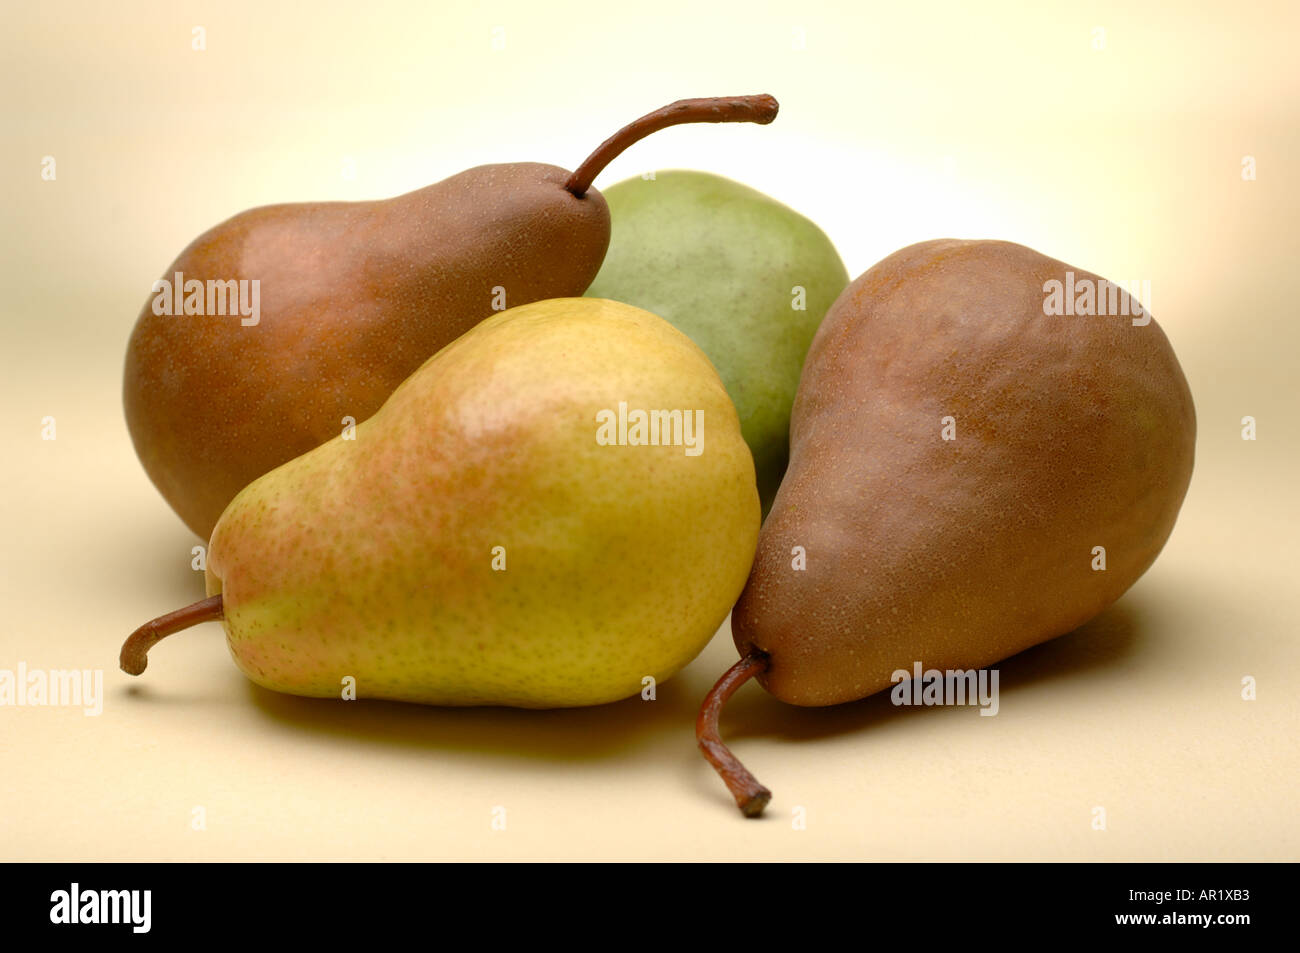 still life image of a group of 4 four mixed pears Bosc Anjou Bartlett Stock Photo